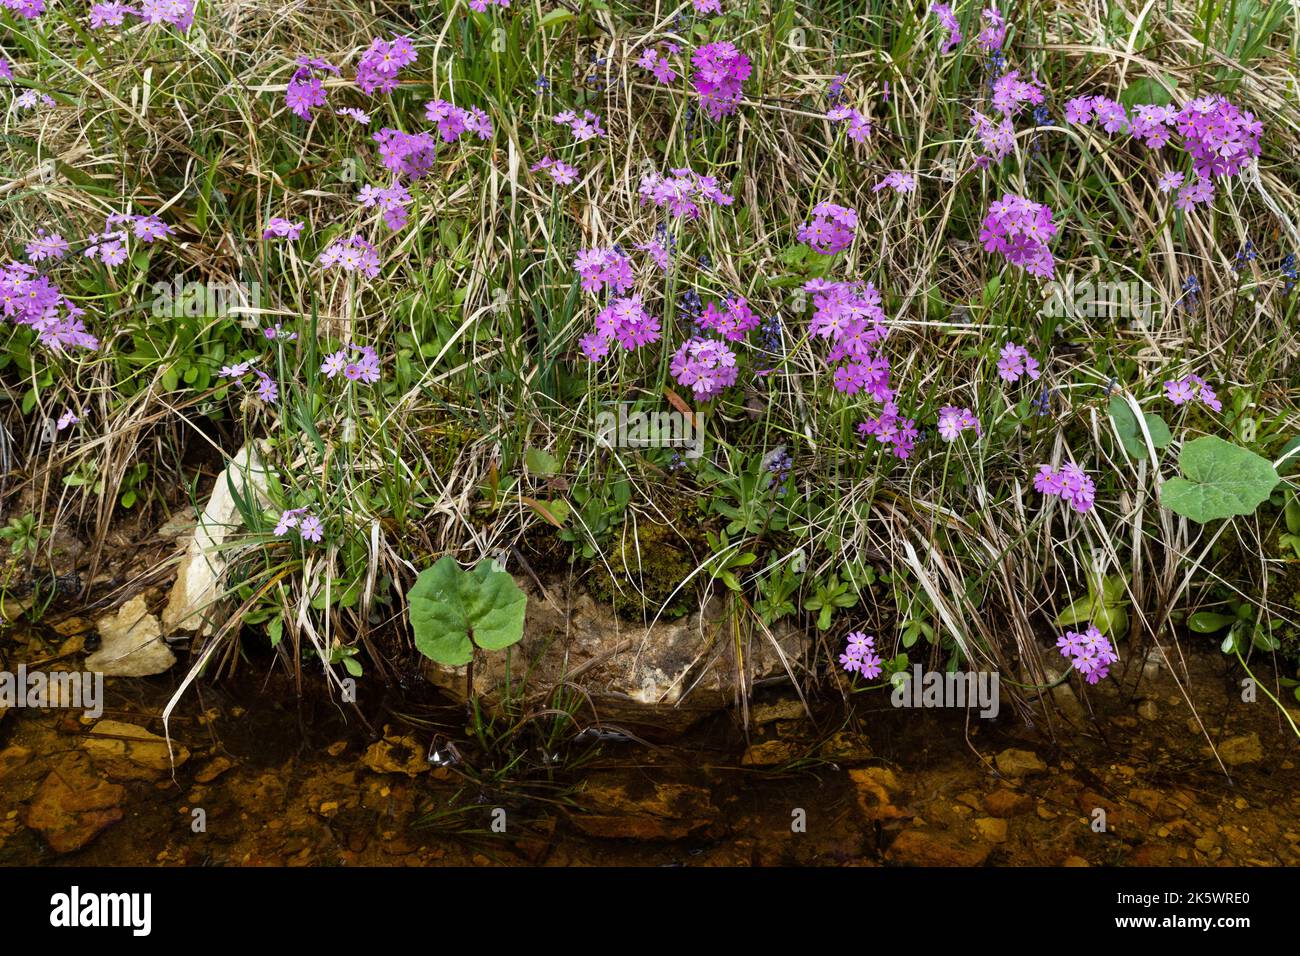 A large group of bright pink Bird's-eye primroses blooming on the bank of a ditch during a late spring day in Estonia Stock Photo